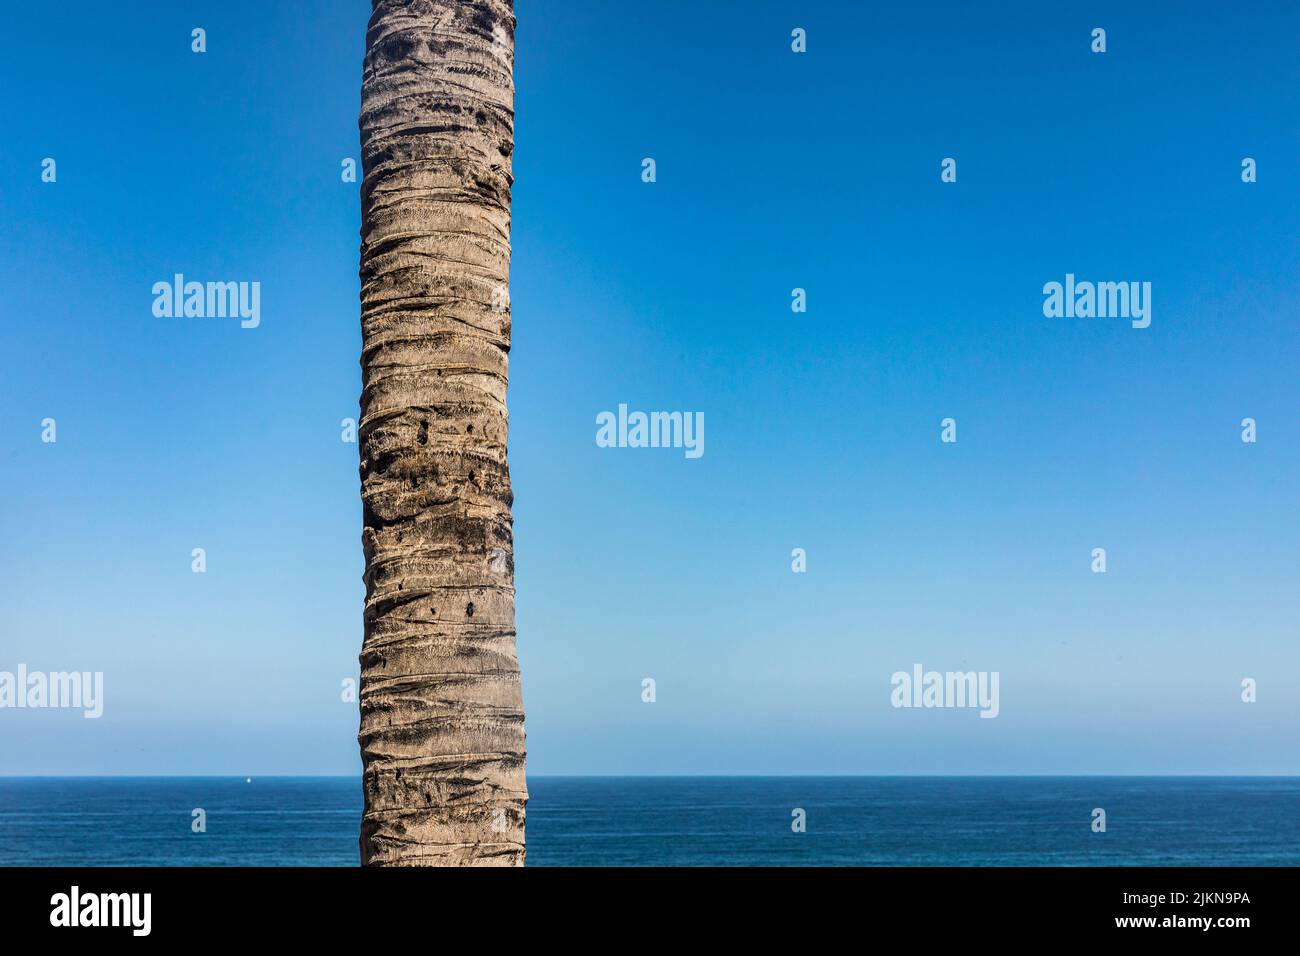 A palm tree, tree trunk, pacific ocean and blue sky. Stock Photo